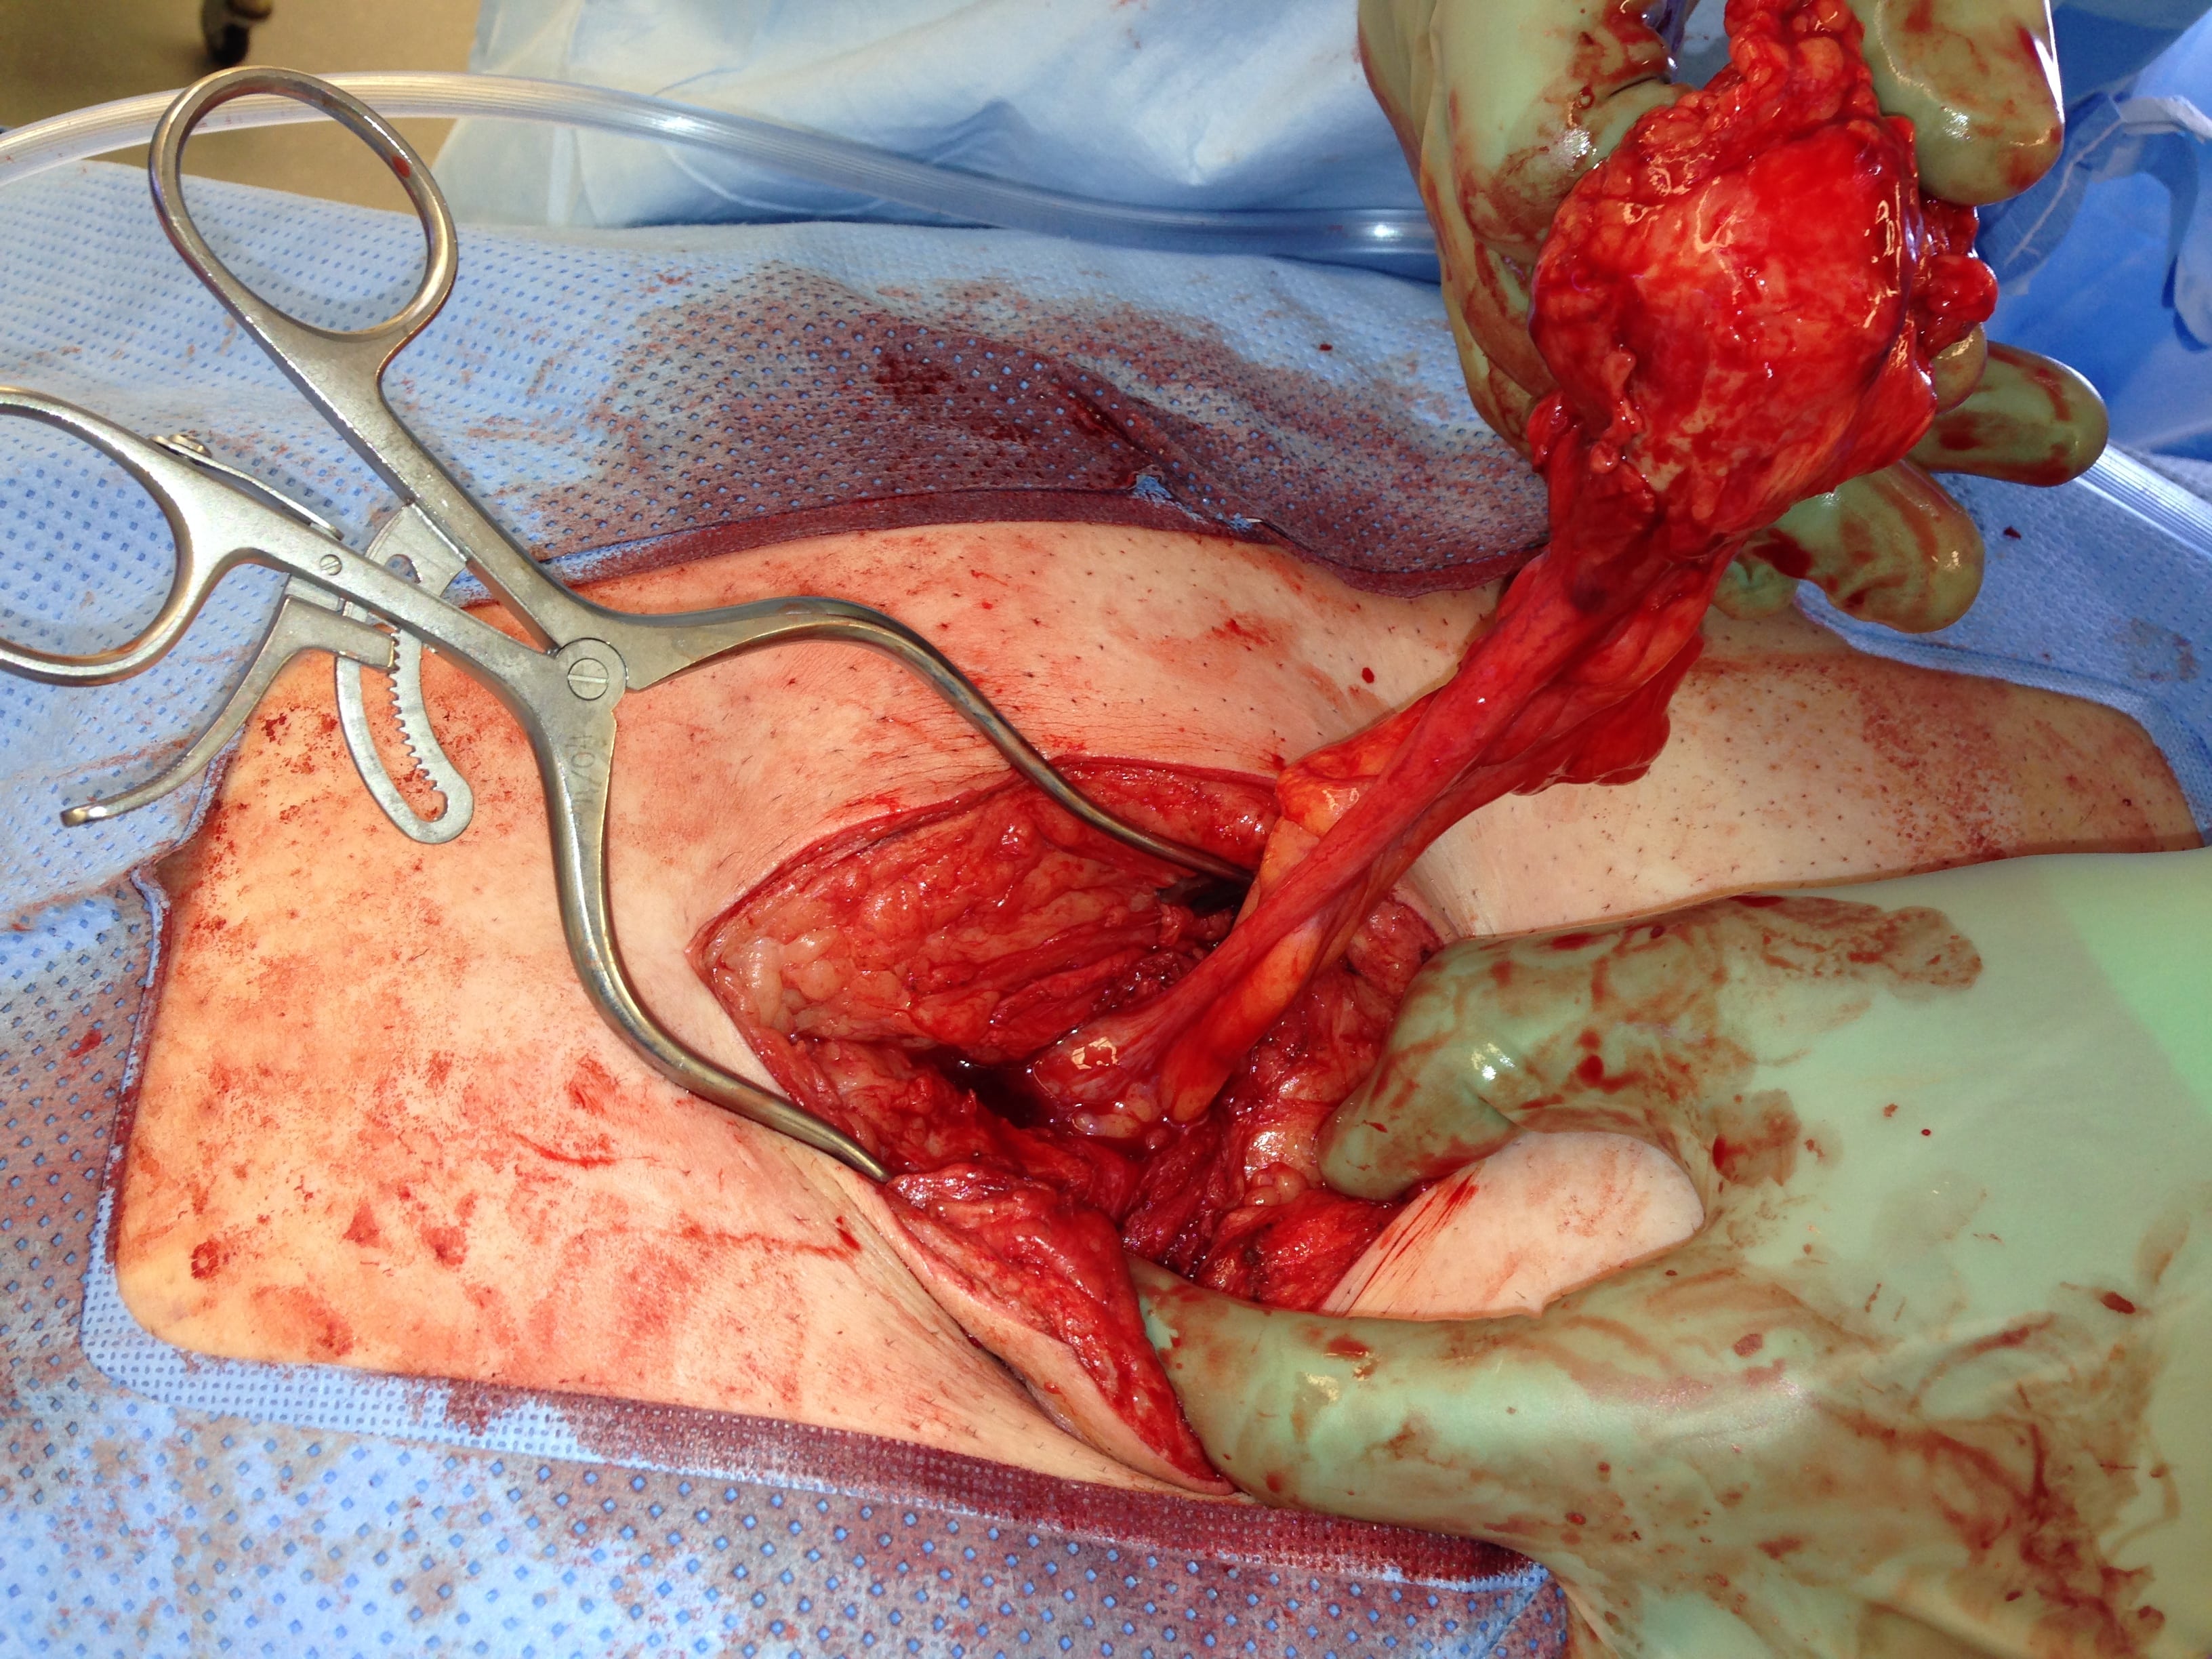 A Gut Feeling: An Extremely Rare Case of Missed Appendicitis